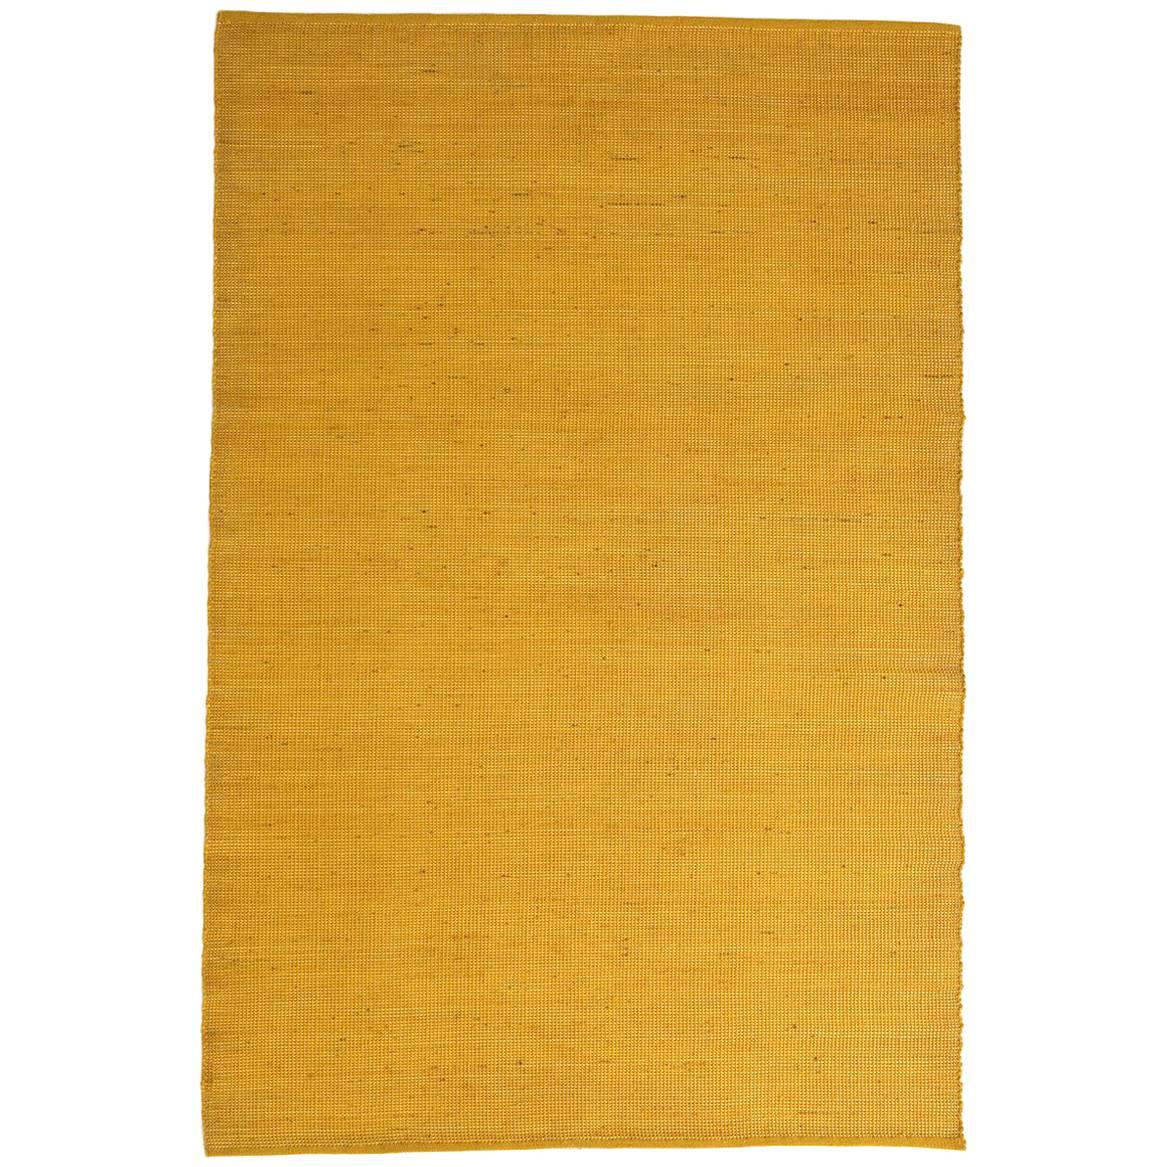 Tatami Yellow Wool and Jute Rug by Nani Marquina & Ariadna Miquel, Small For Sale